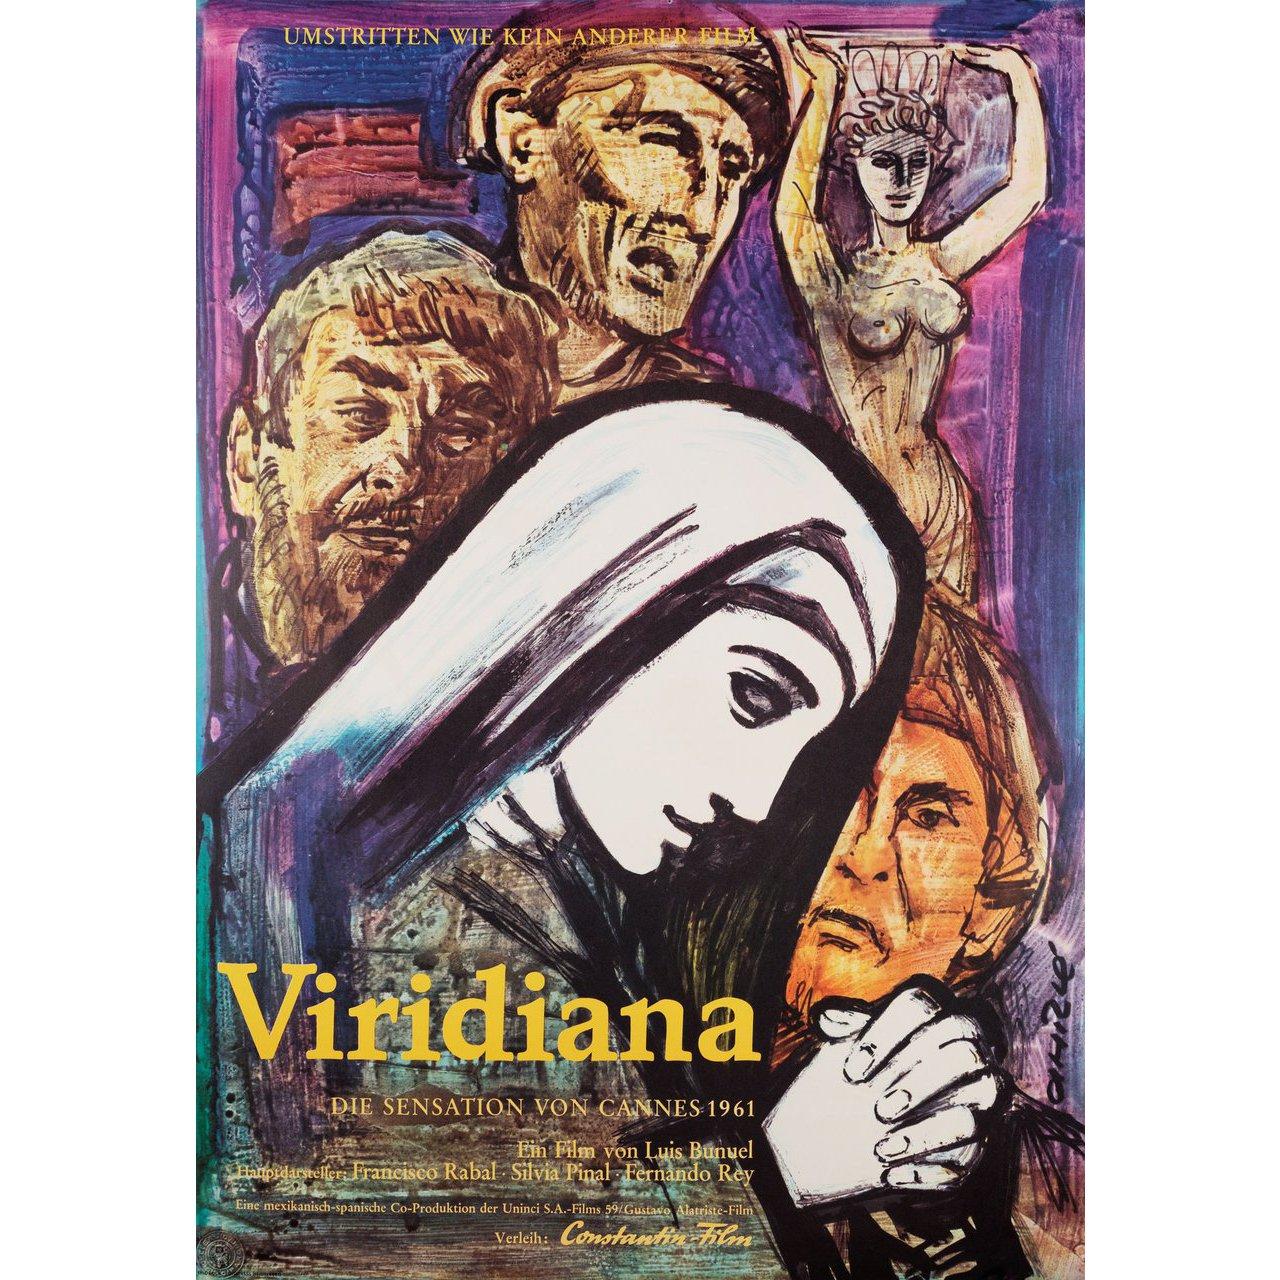 Original 1962 German A1 poster by Ahrle Tostman for the first German theatrical release of the film Viridiana directed by Luis Bunuel with Silvia Pinal / Francisco Rabal / Fernando Rey / Jose Calvo. Very Good-Fine condition, rolled. Please note: the